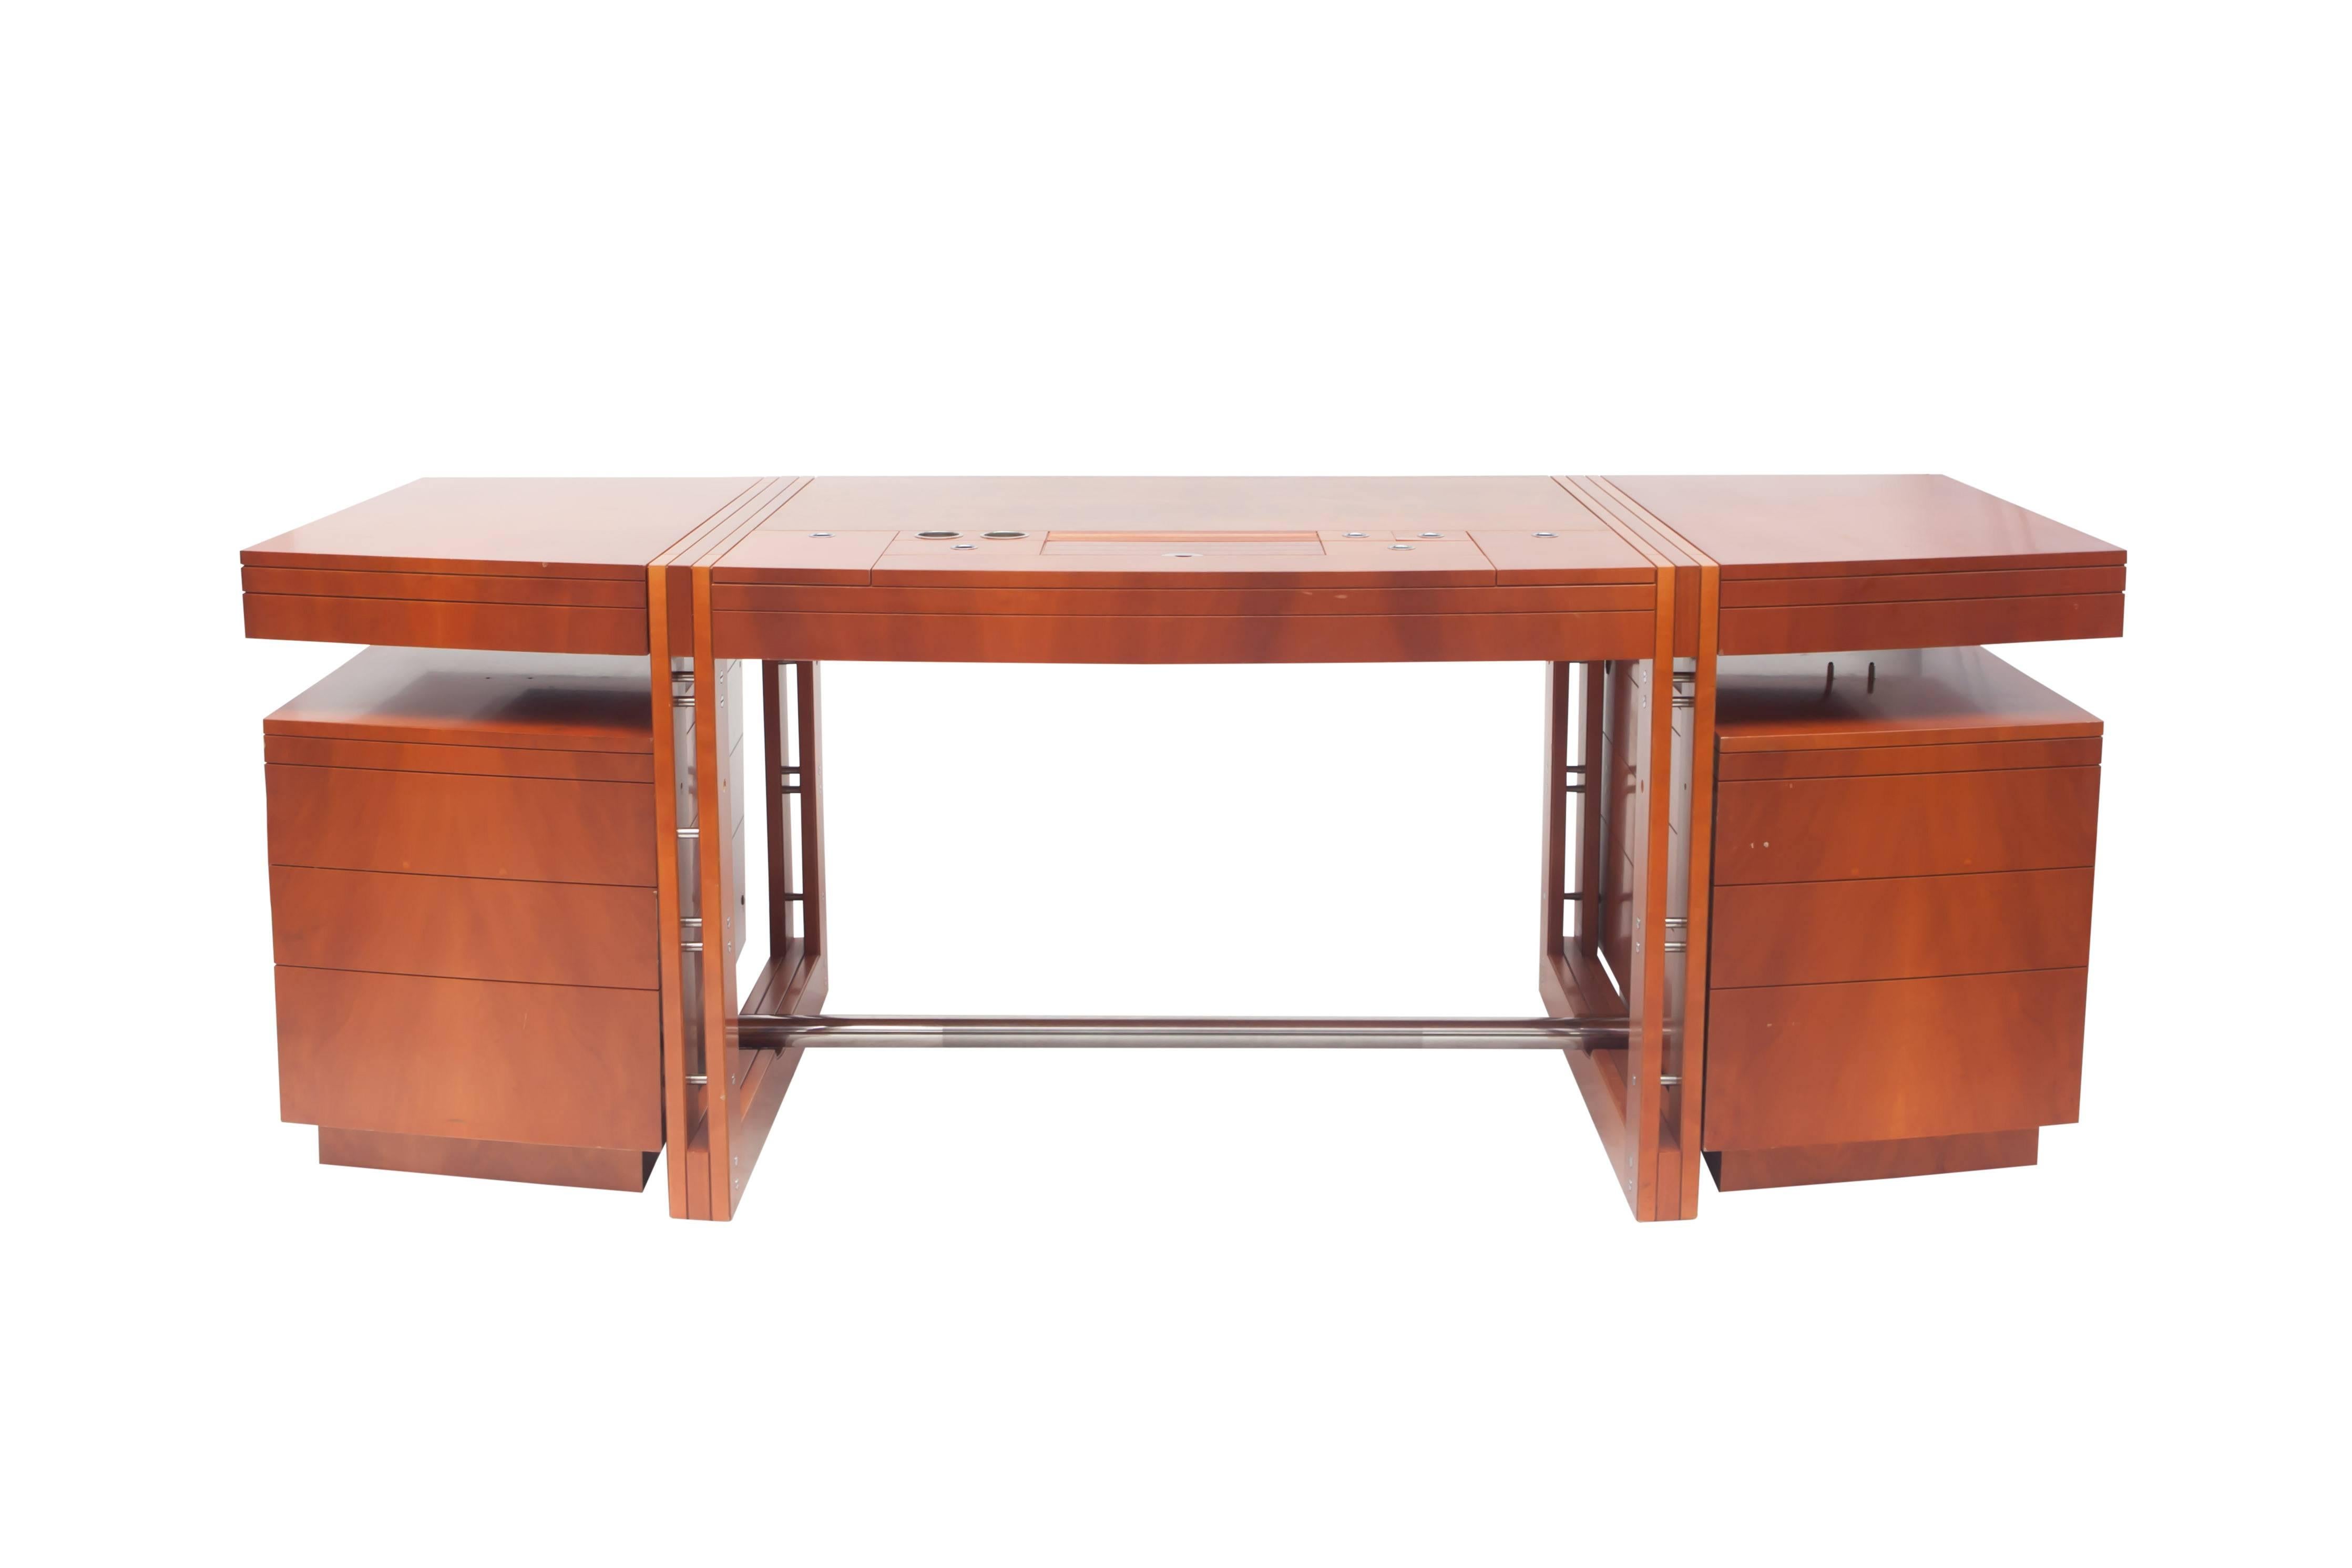 Post-modern High-end desk of the Tresserra collection.
It’s one of the most emblematic pieces of the collection, designed in 1988. 

This is an original model of the target desk.
Measures: L 210 cm x D 85 cm x H 74 cm.

Dark walnut wood.